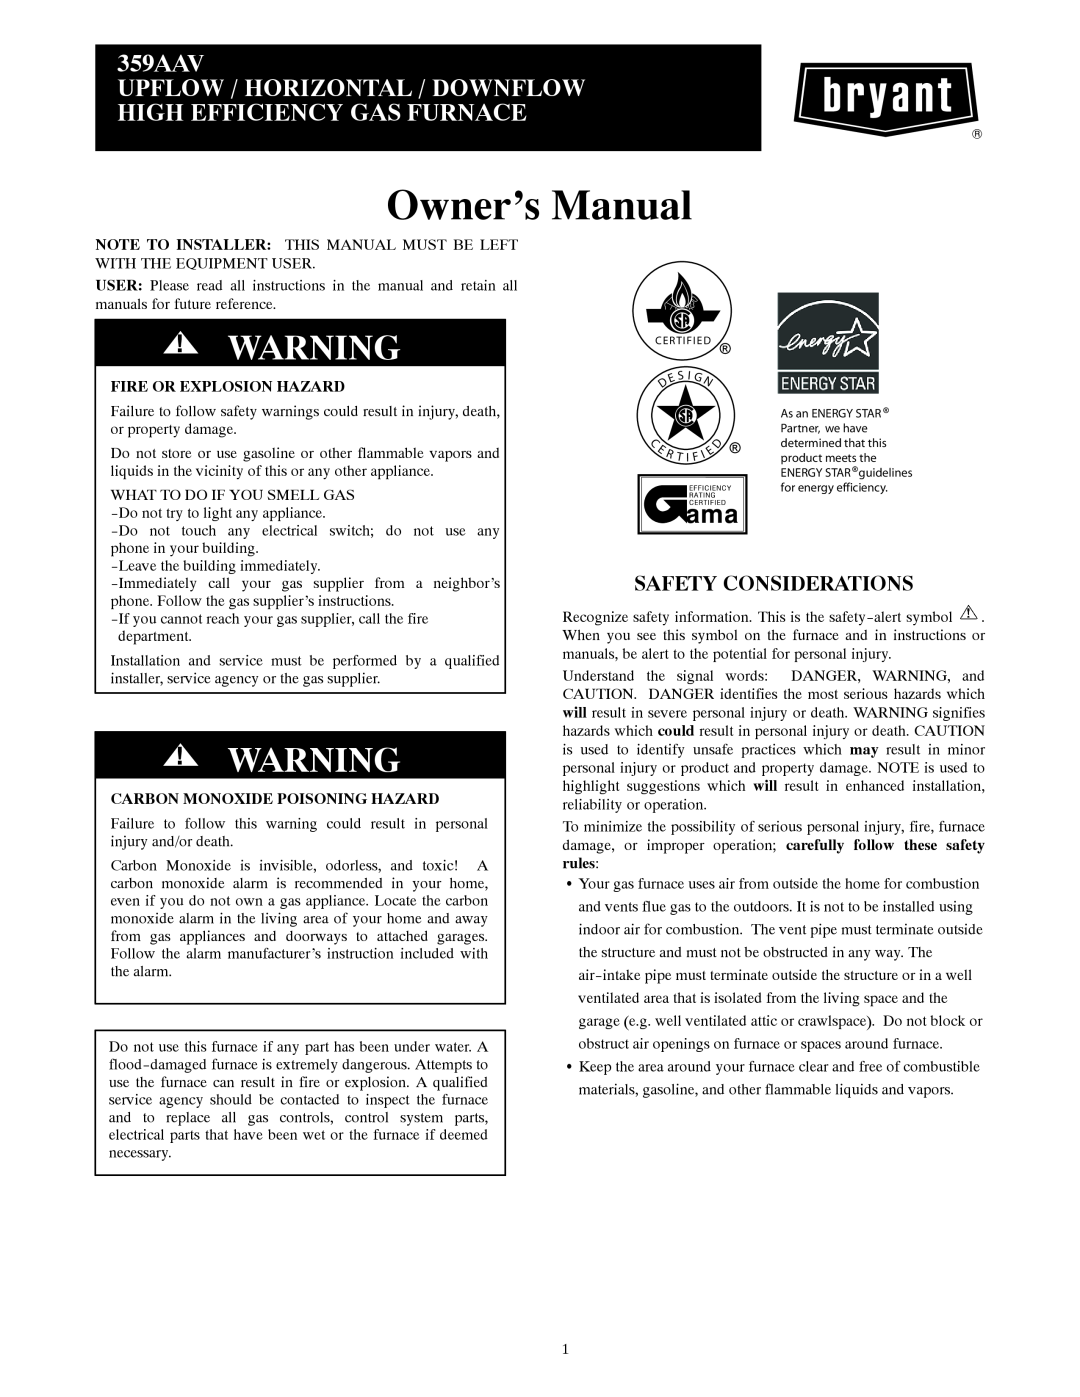 Bryant 359AAV owner manual Fire Or Explosion Hazard, Carbon Monoxide Poisoning Hazard, Safety Considerations 